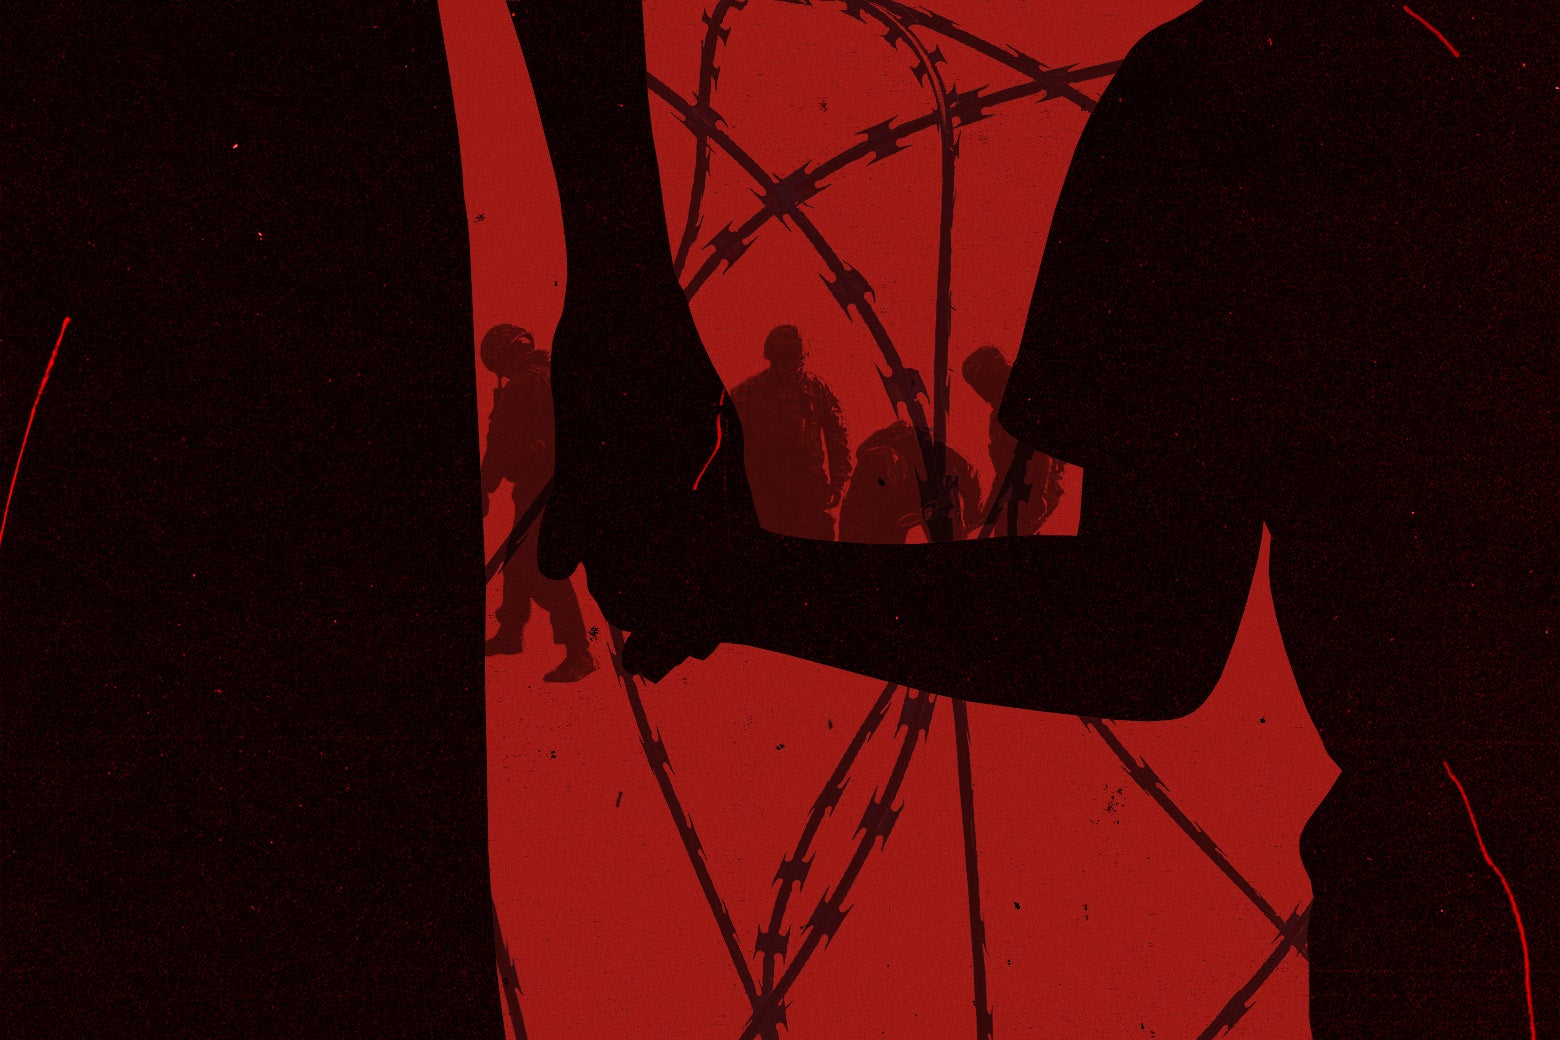 A photo illustration of an adult and a child holding hands in front of a barbed wire fence, with silhouettes of Texas state national guard members in the background.